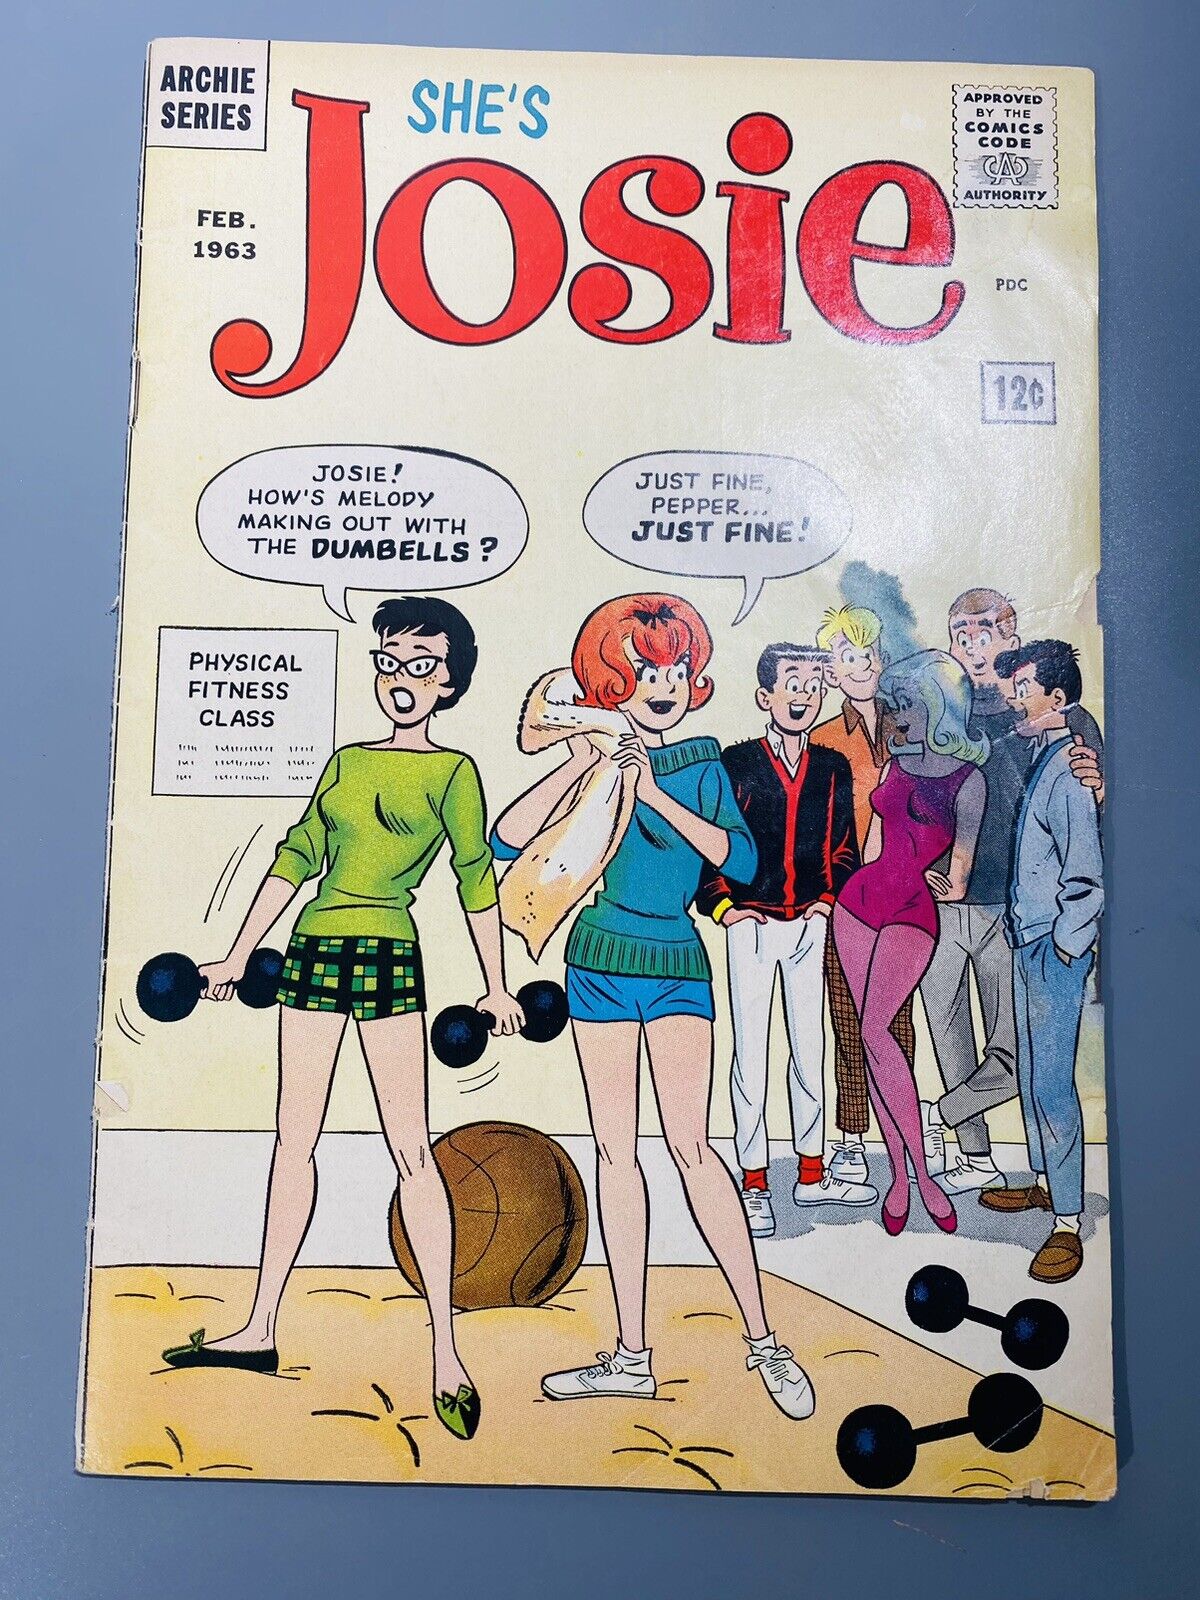 She’s Josie #1 (Archie, 1963) - First Appearance of Melody, Pepper - 1st print